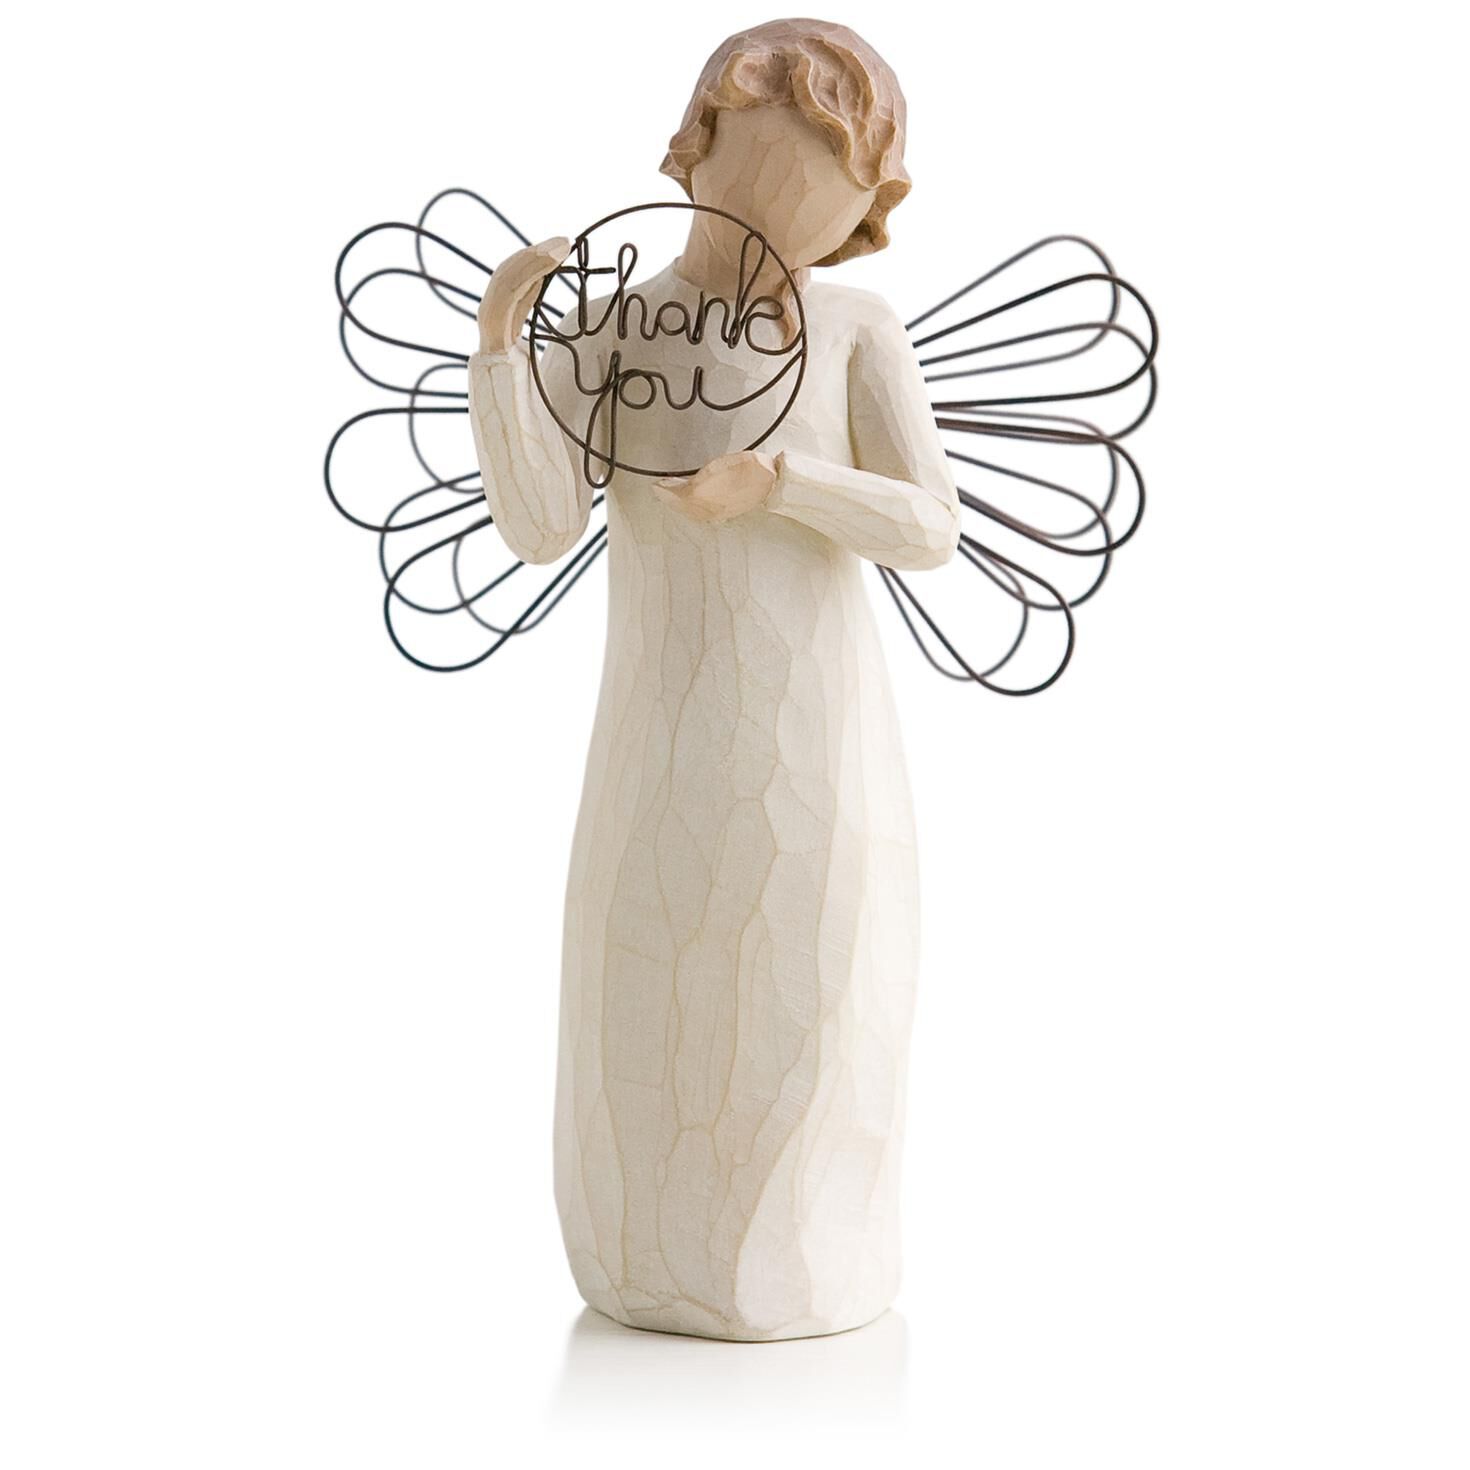 Willow Tree Just for You Figurine & Tree Thank You Figurine 